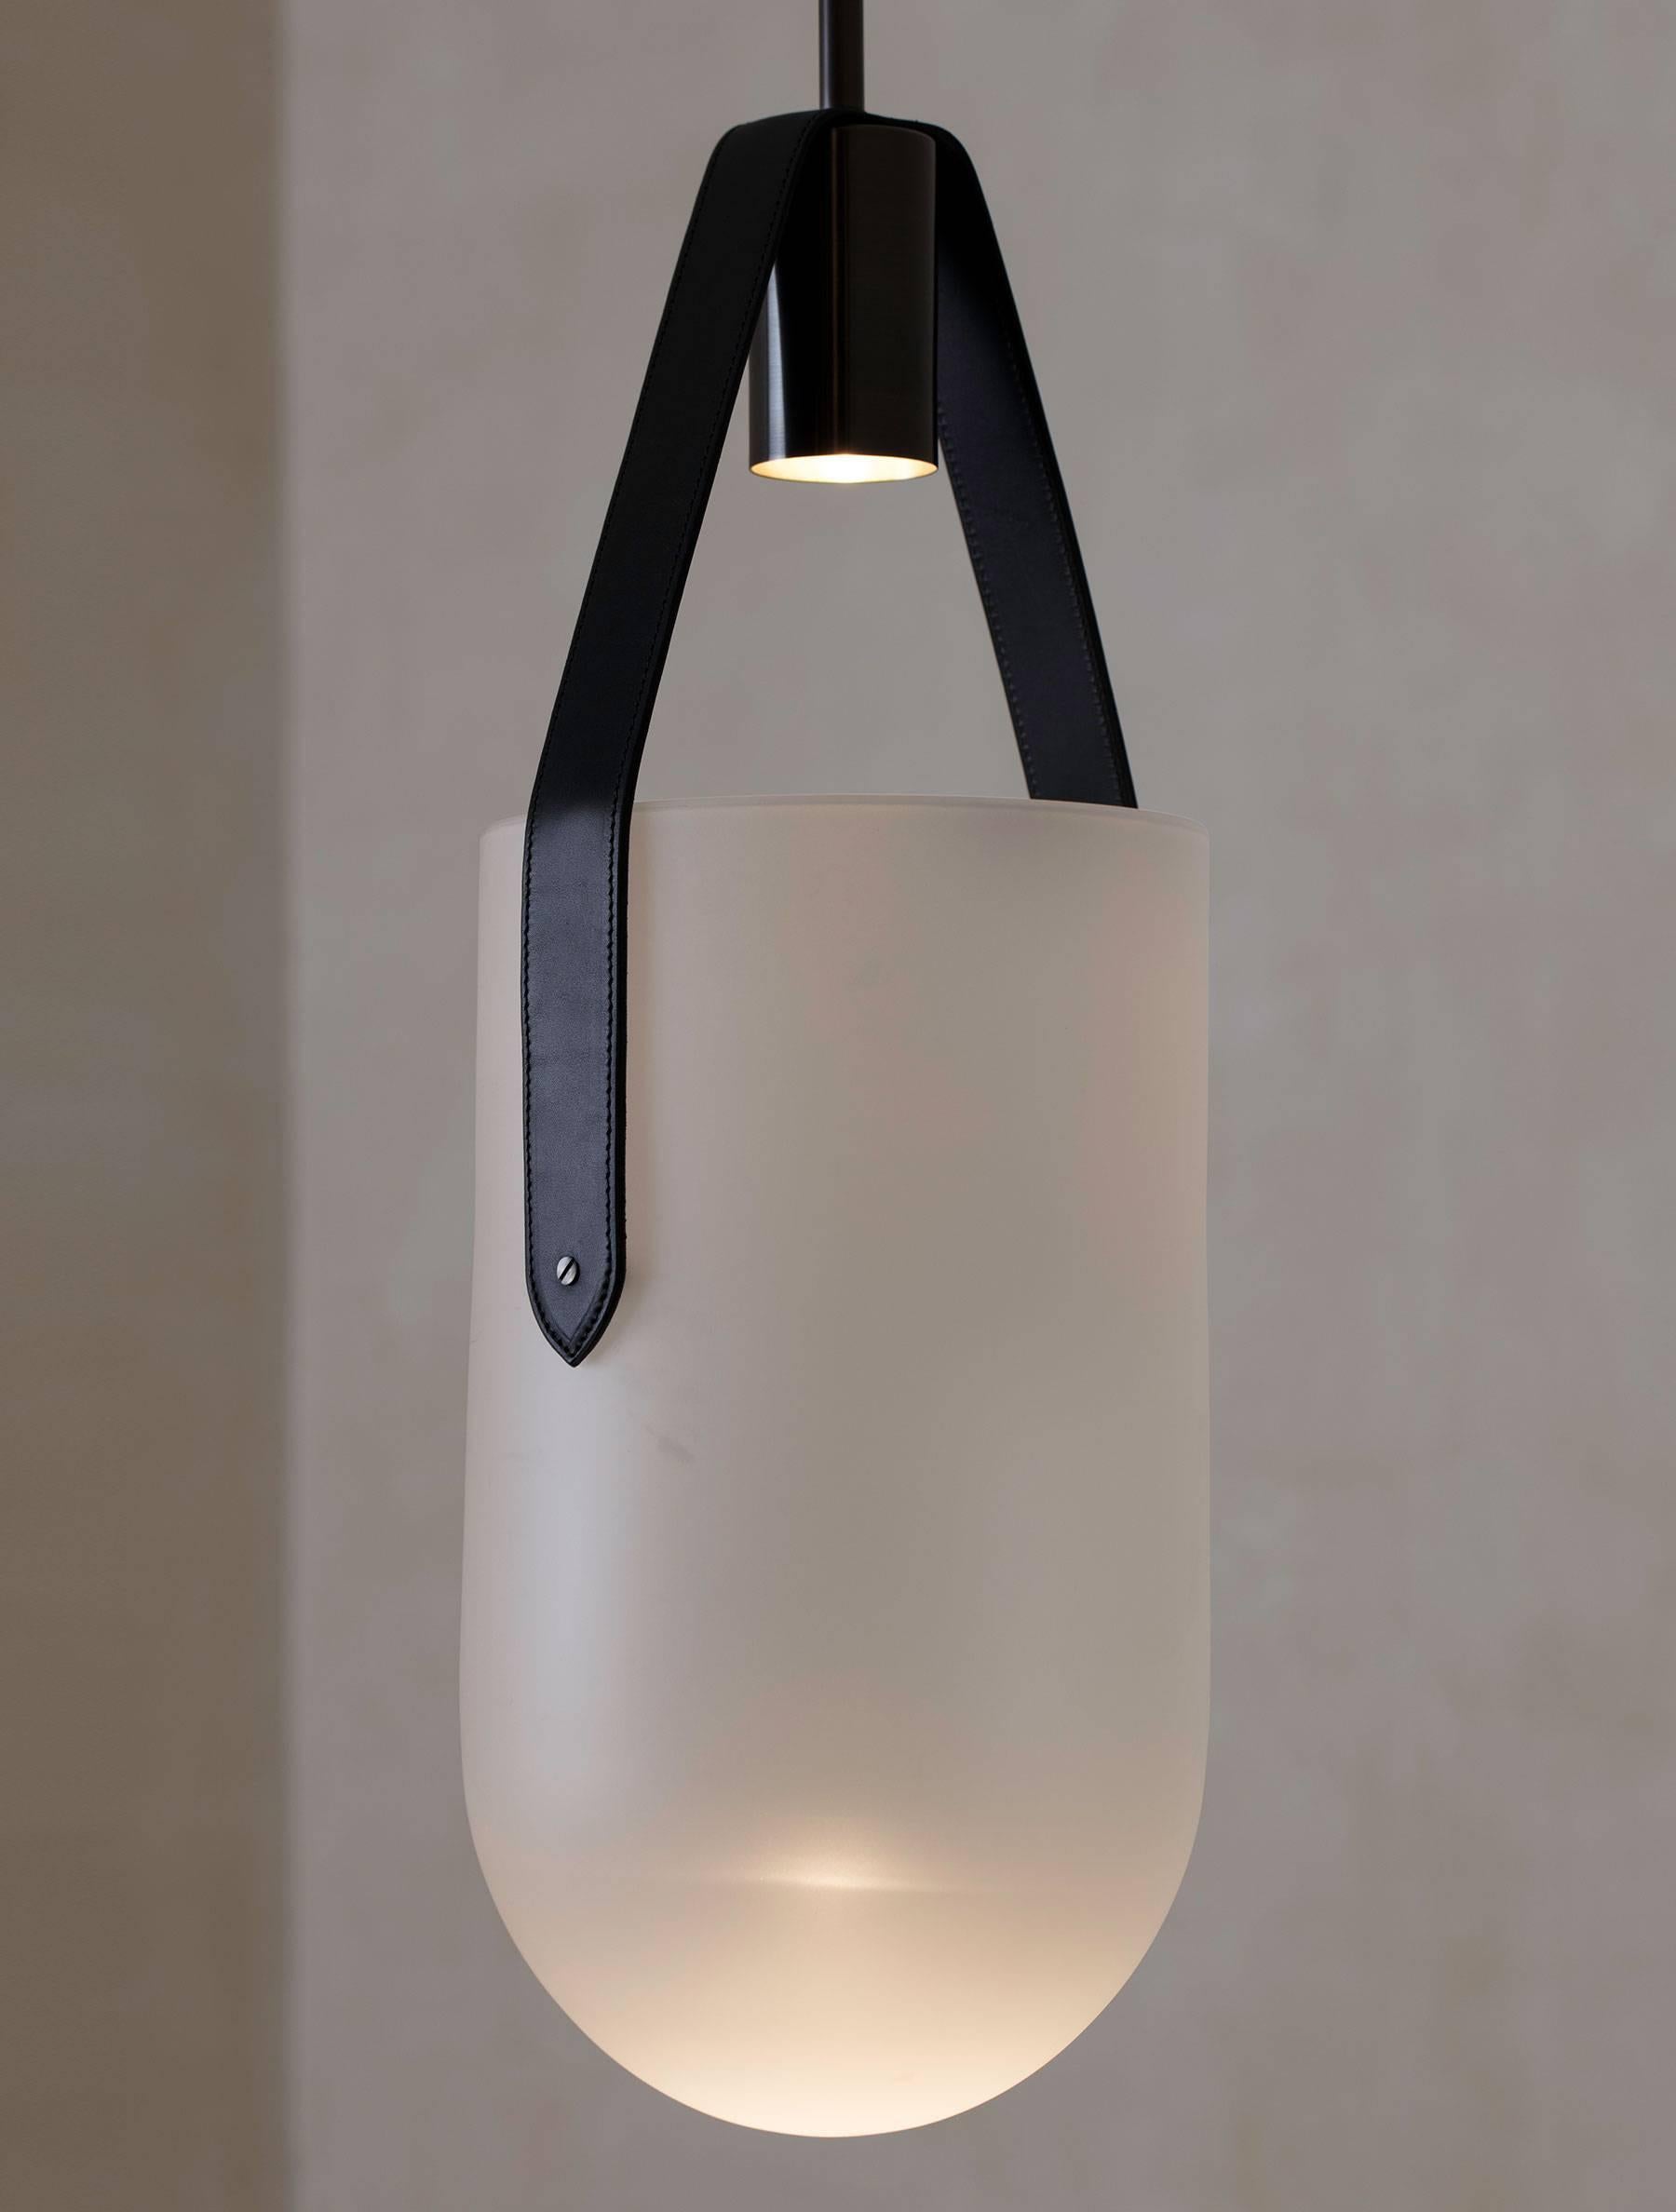 A spot bulb shoots light into a sandblasted glass dome that is suspended by a leather strap and brass hardware. The fixture creates a warm glow inside the glass as well as casting dramatic shadows onto the ceiling. UL Certified.